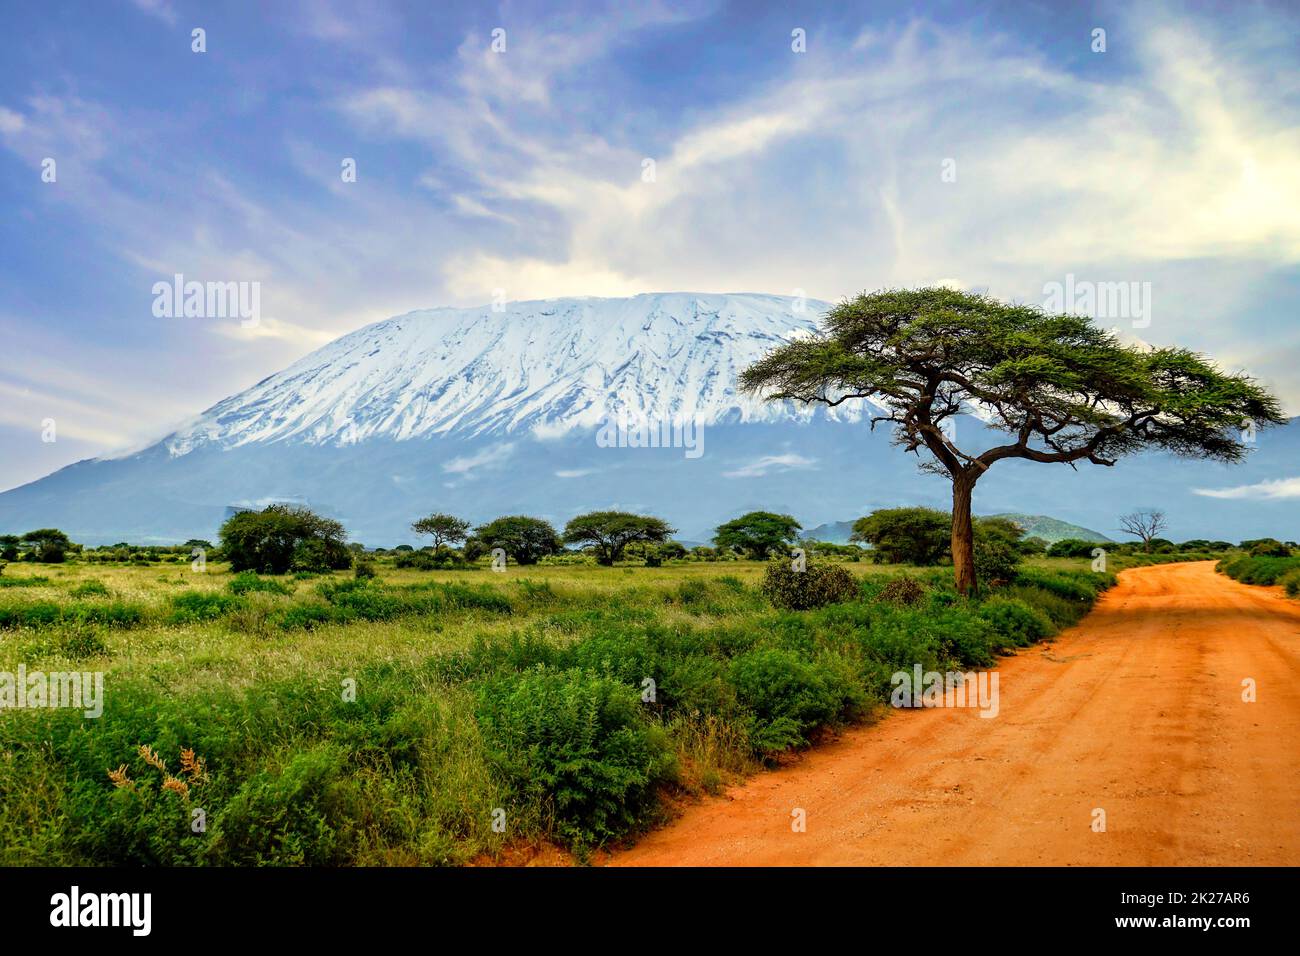 Pictures from the snow-capped Kilimanjaro in Kenya Stock Photo